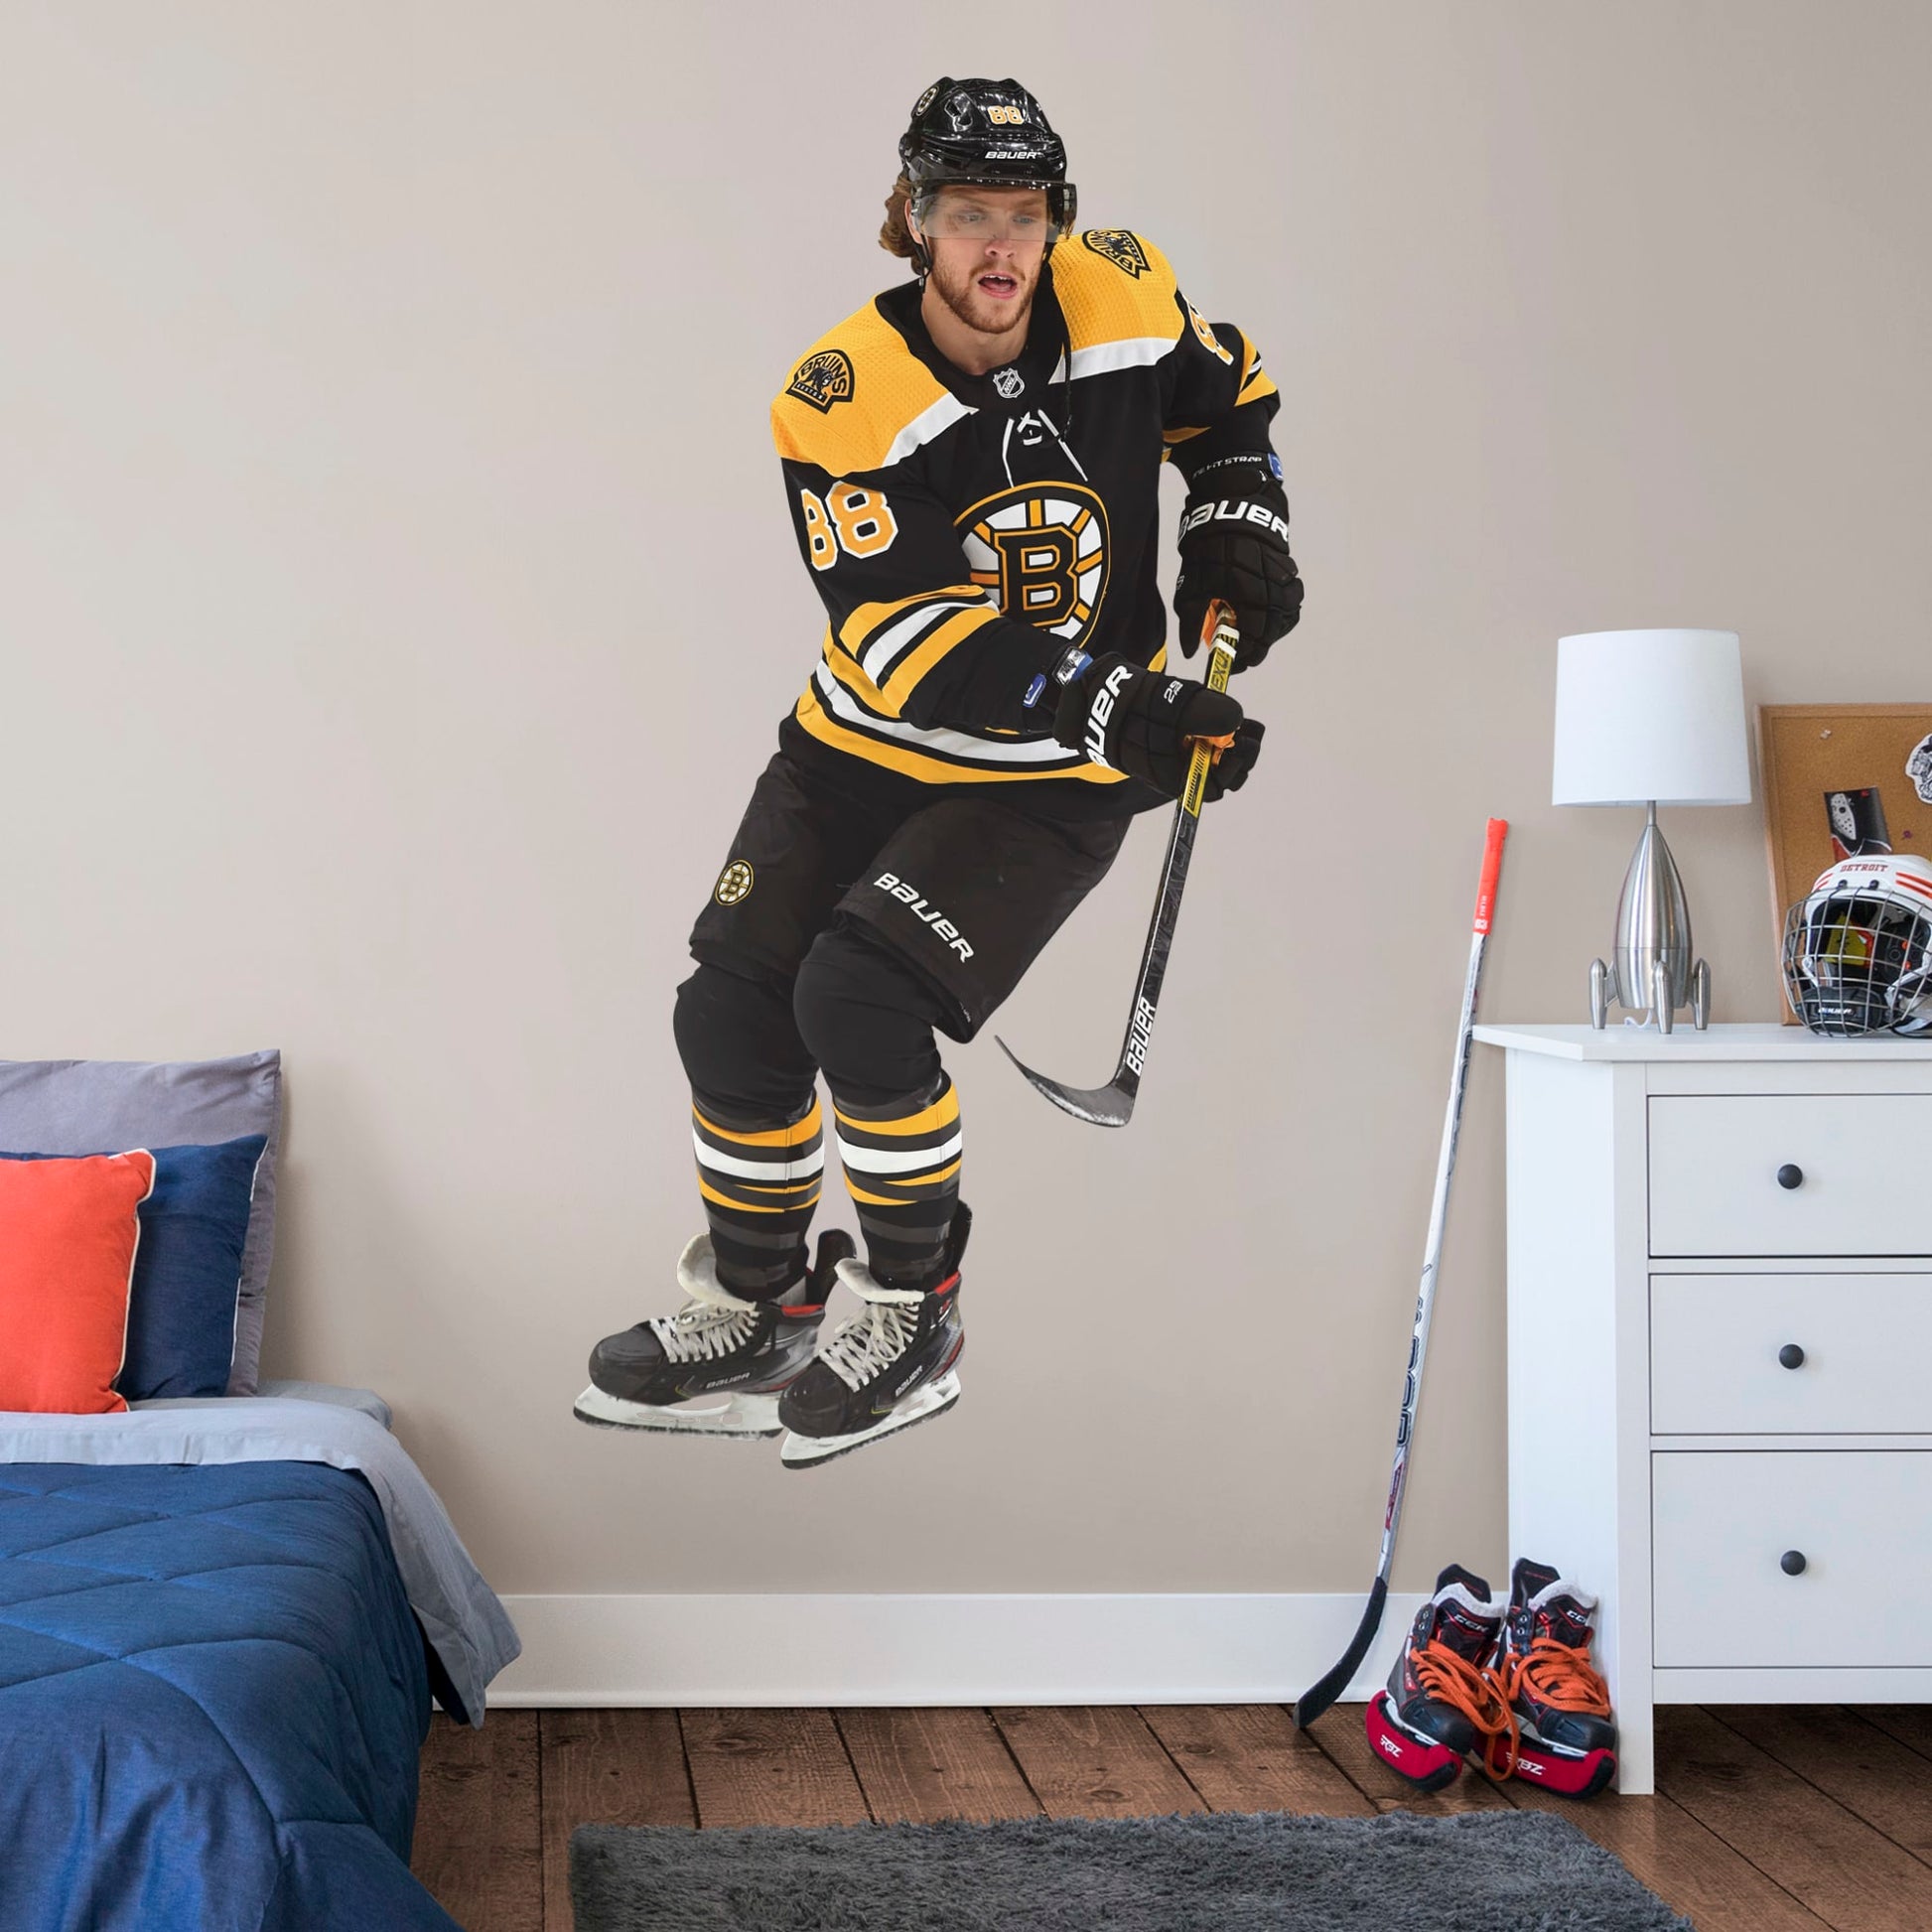 Life-Size Athlete + 2 Decals (41"W x 78"H) He was the B's first-round pick in the 2014 NHL draft, and “Pasta” has since become one of the league’s most prolific scorers. Bring the action into the game room, living room or locker room with this officially licensed NHL wall decal featuring Boston Bruins player David Pastrnak poised to skate into action.